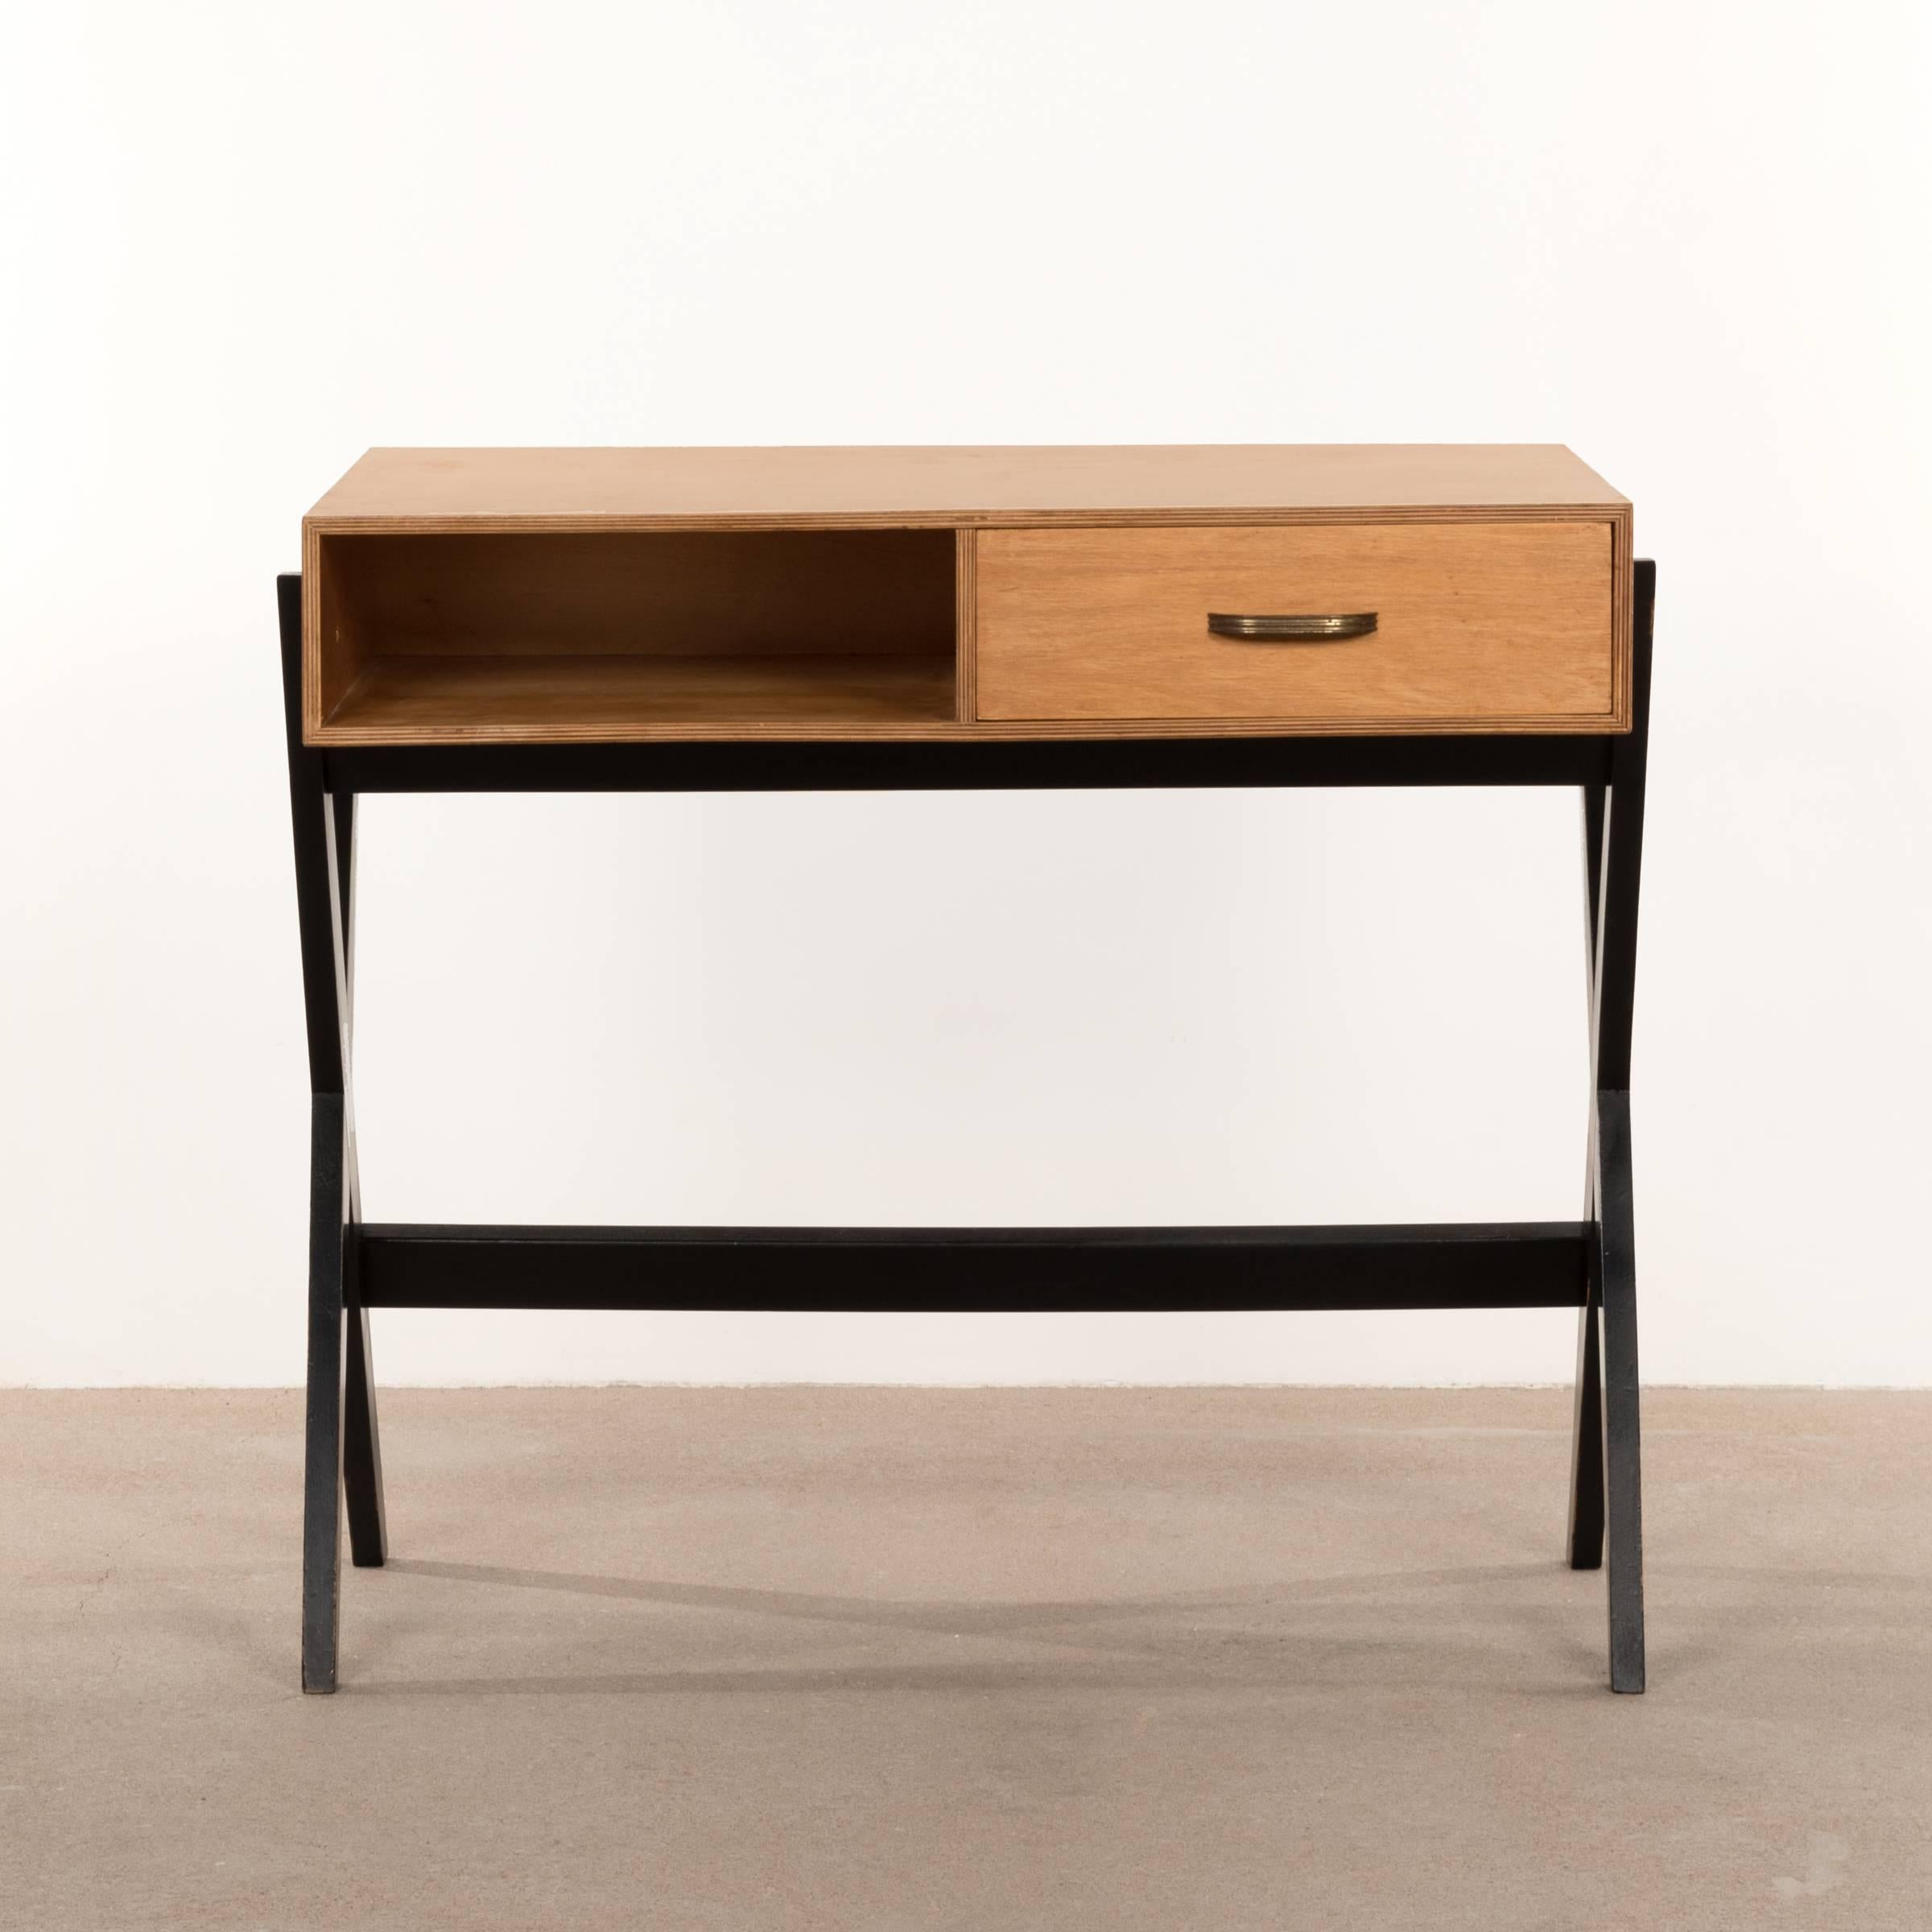 Elegant small Industrial birchwood desk by Coen de Vries in 1954. Ebonized X-base frame, single drawer and birch plywood top. Good condition with small traces of use.